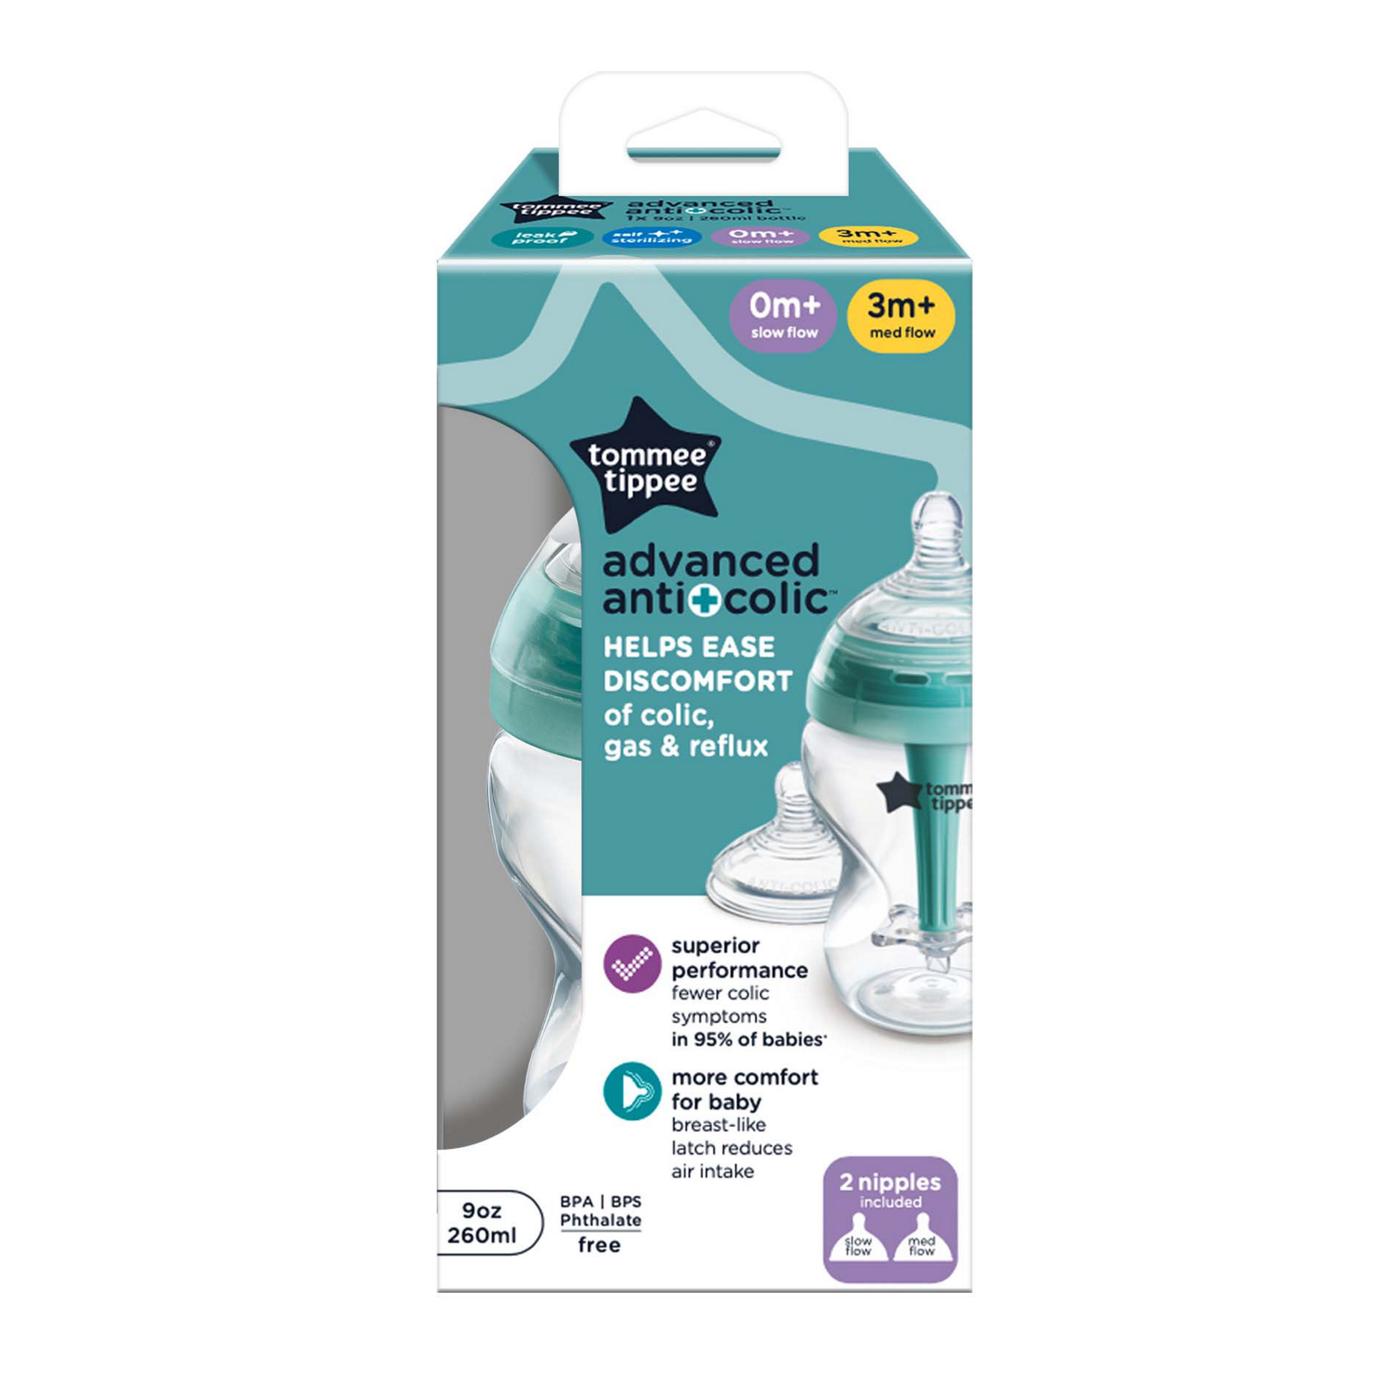 Tommee Tippee Advanced Anti-Colic Bottle - Clear; image 1 of 3